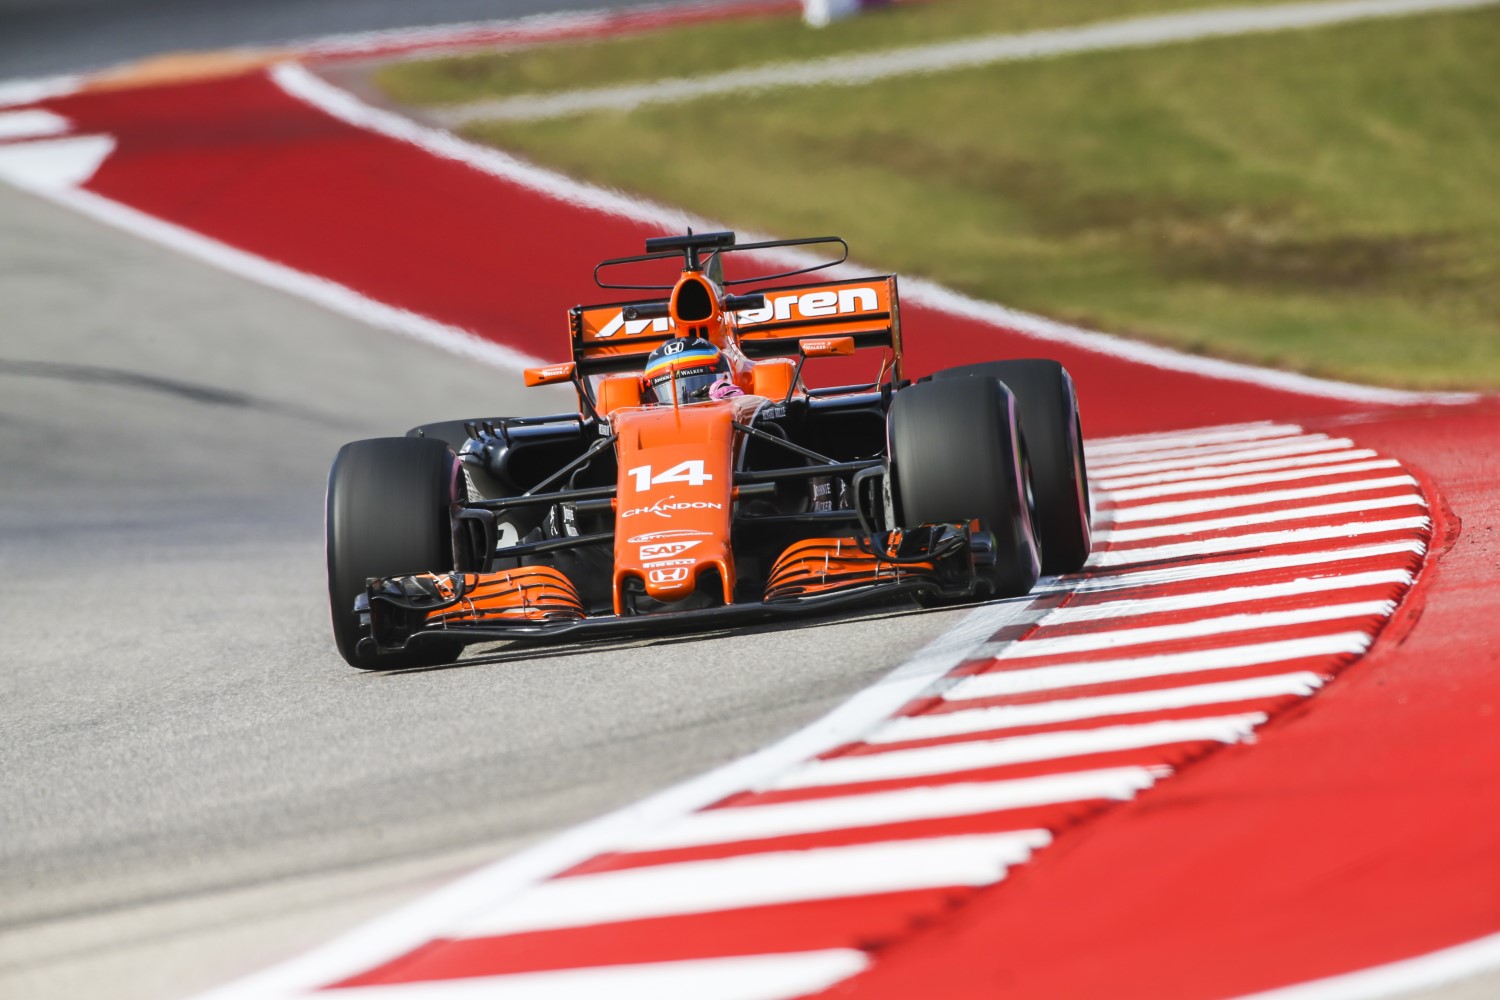 Fernando ALonso says the McLaren-Honda is fast in Mexico City